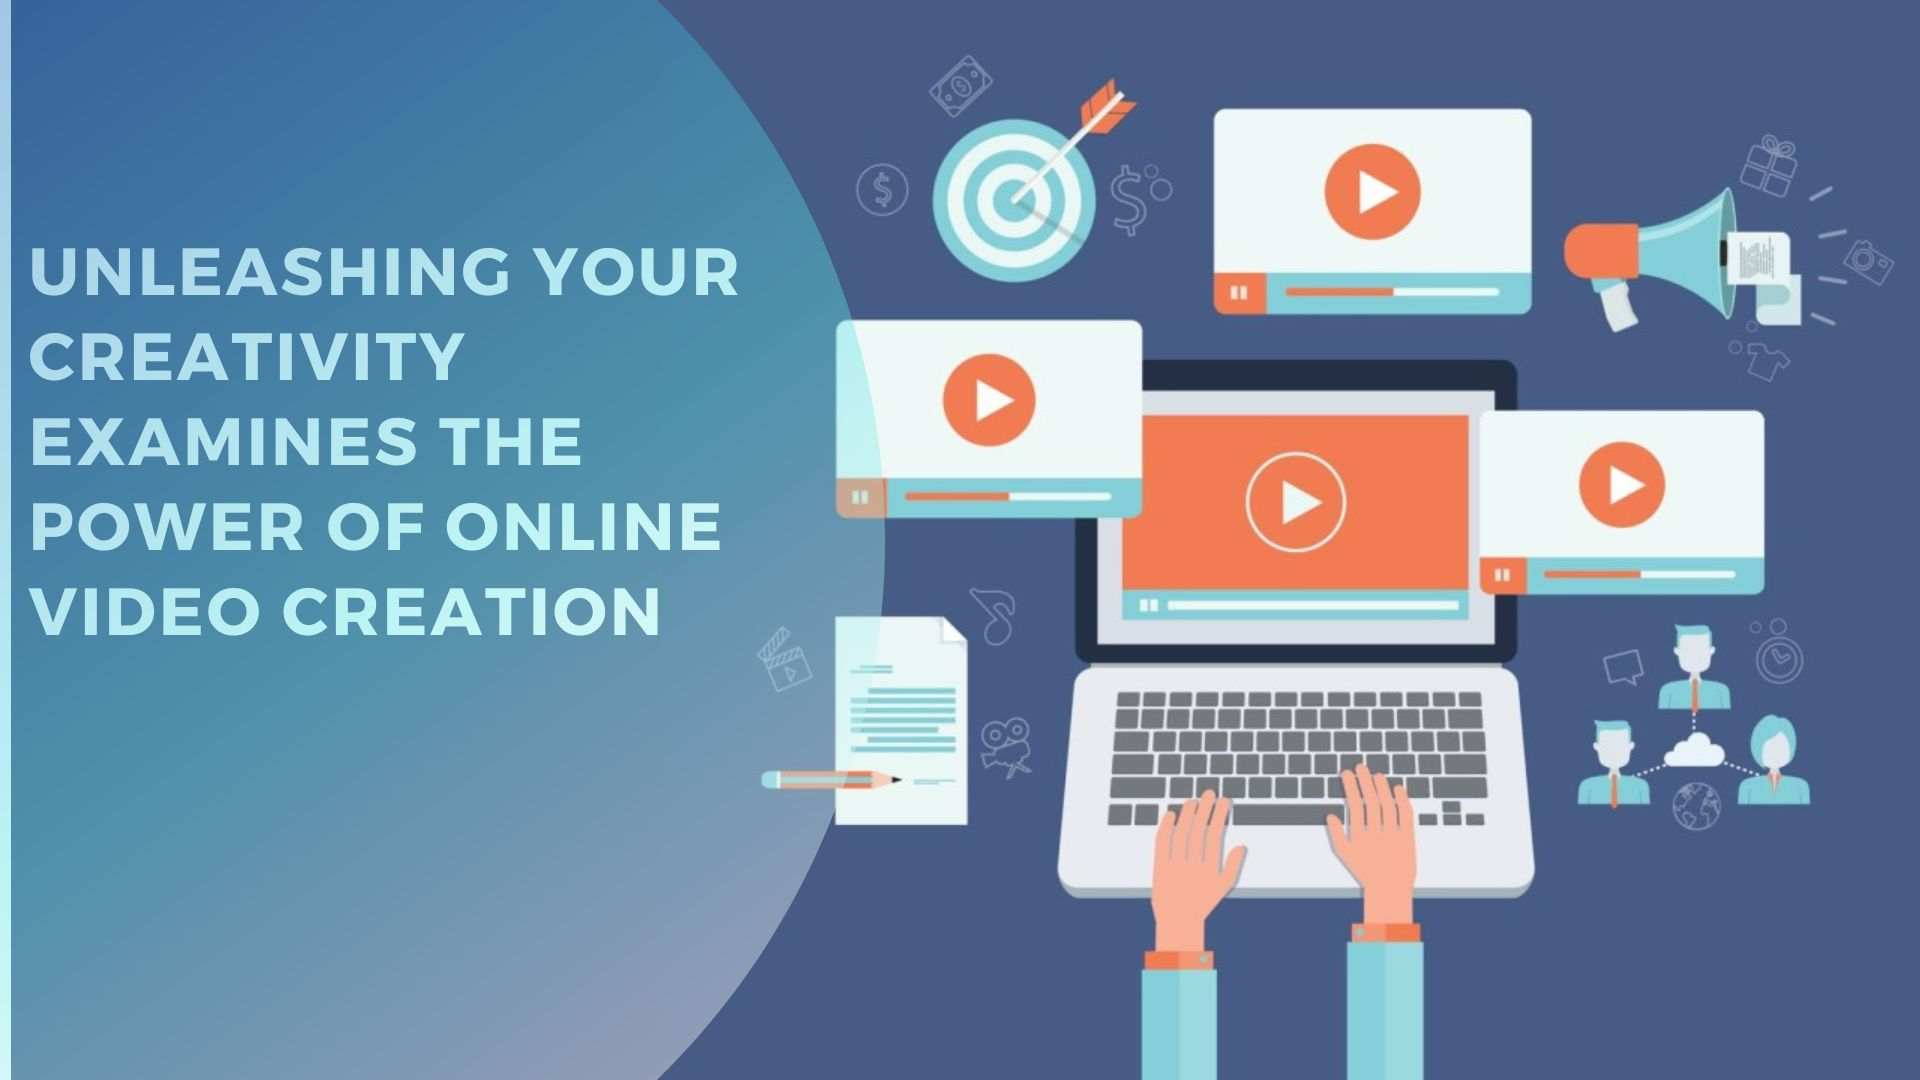 unleashing your creativity examines the power of online video creation